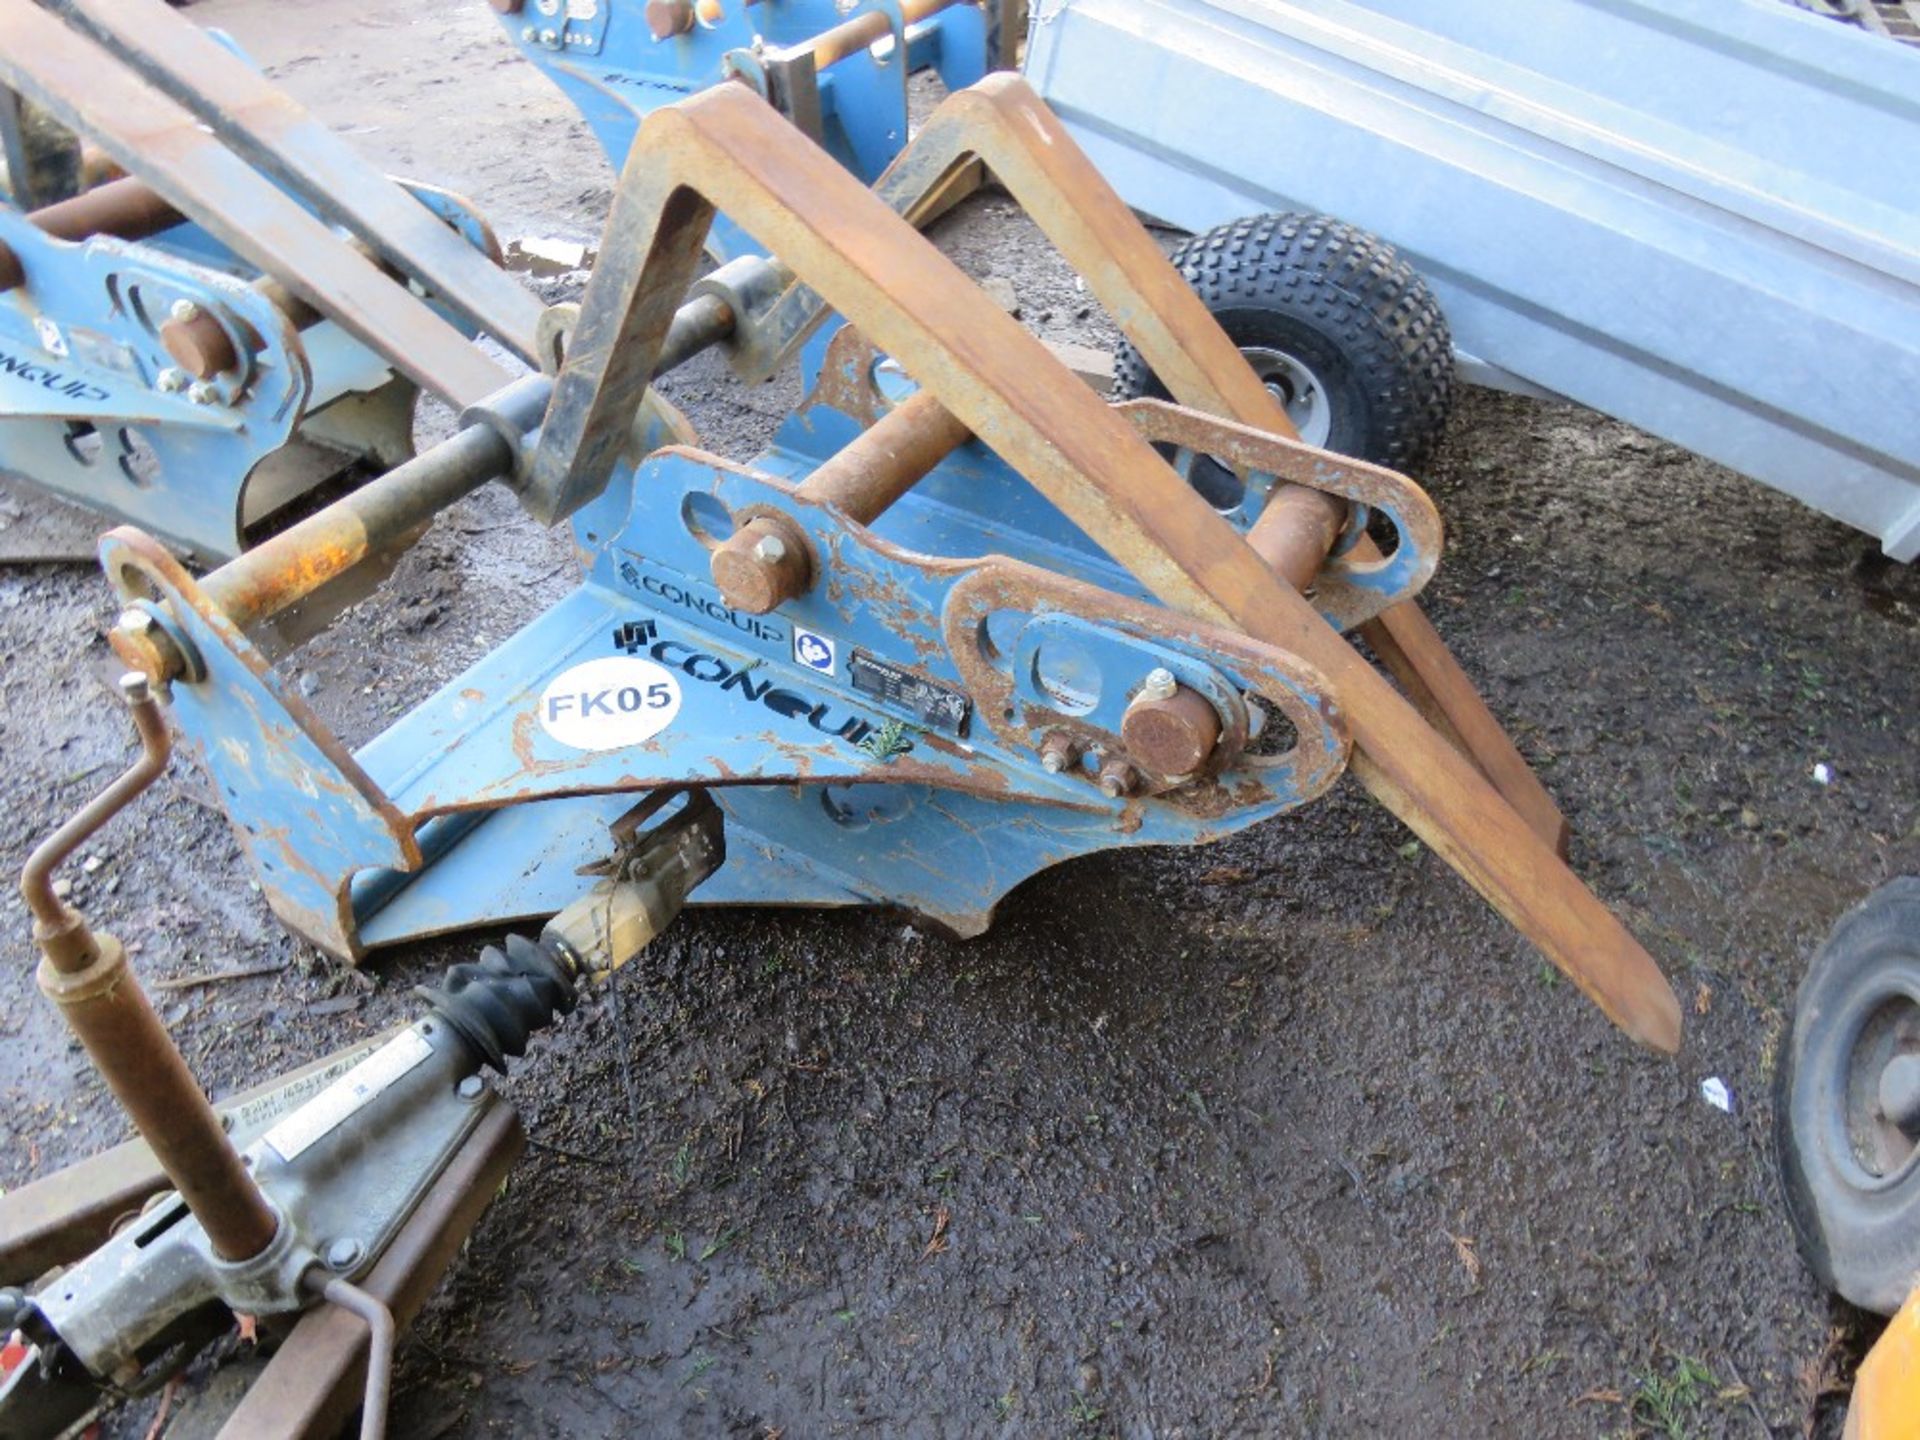 SET OF EXCAVATOR MOUNTED PALLET FORKS, 2022 BUILD. CURRENTLY ON 80MM PINS, CAN ALSO TAKE 65MM PINS. - Image 3 of 5